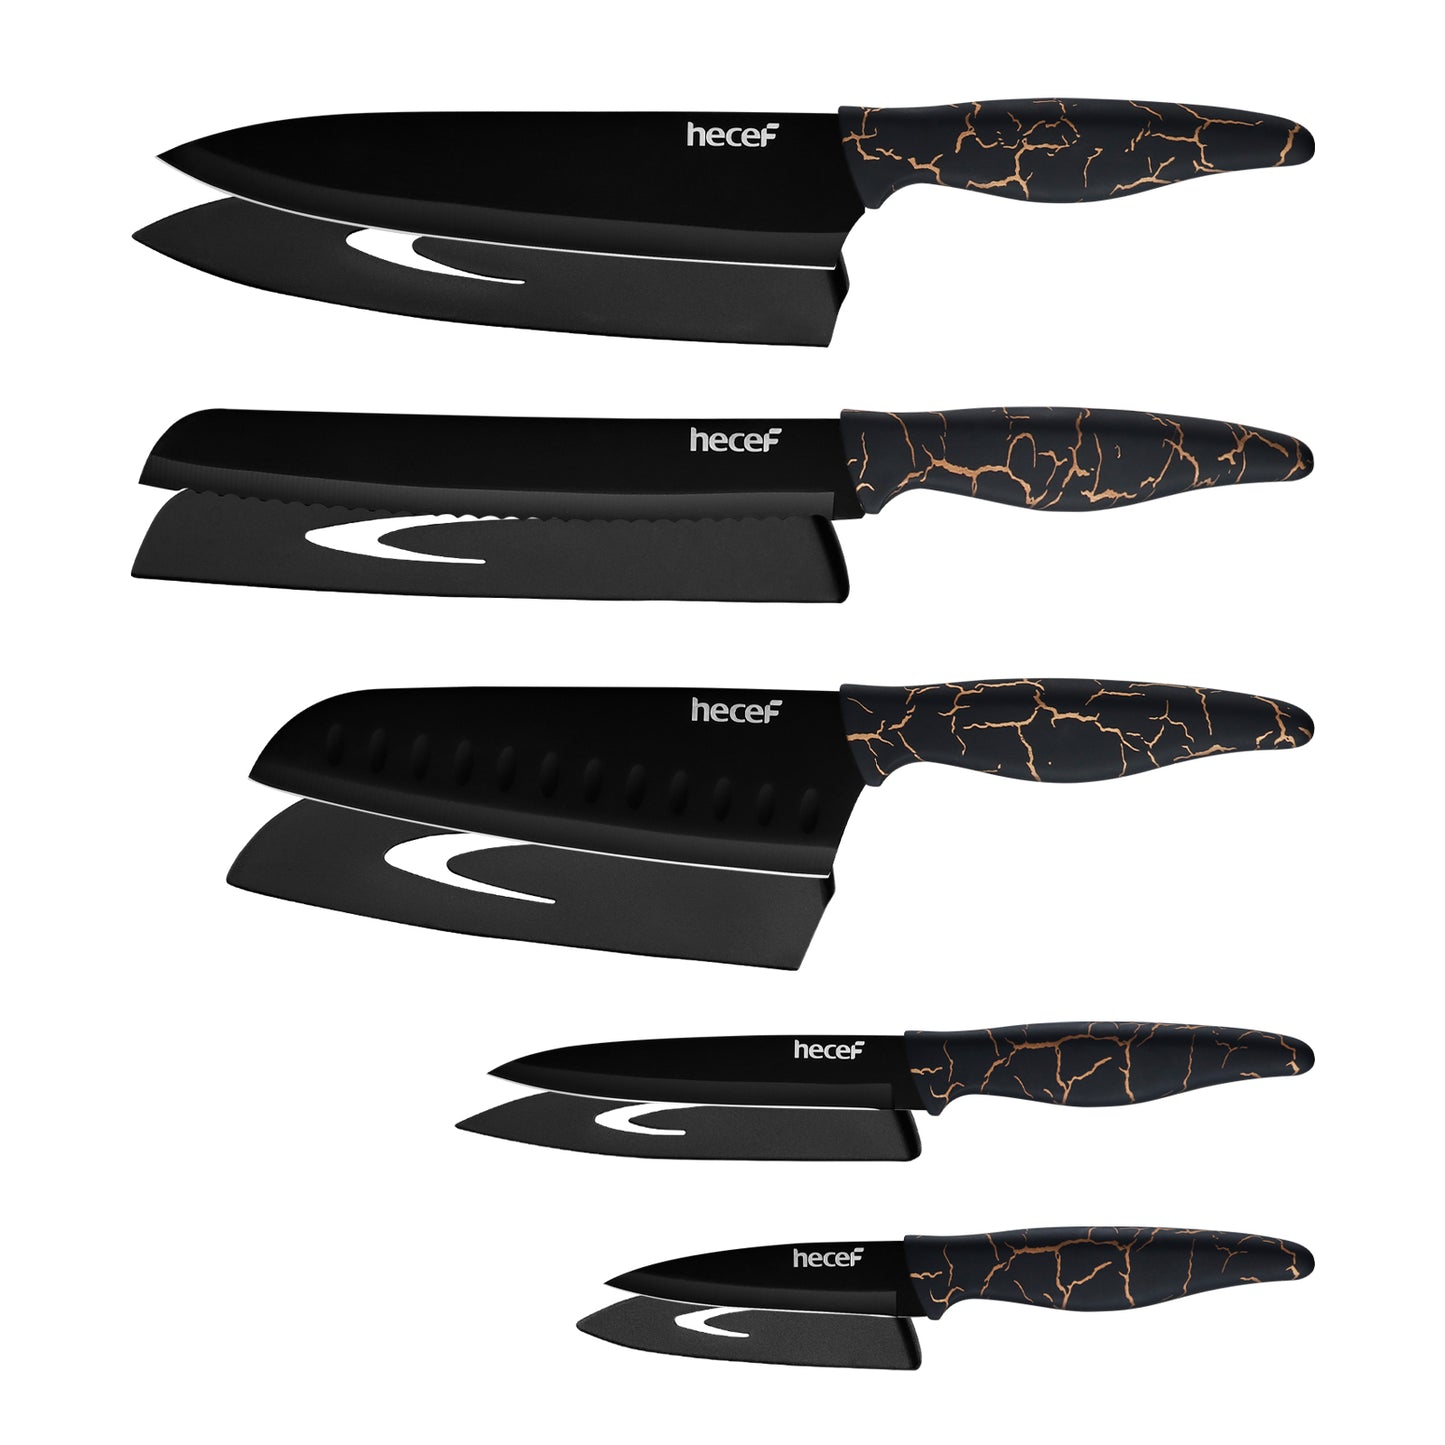 hecef 5 PCS Non-stick Coated Kitchen Knife Set with PP Handle and Protective Sheath, Exclusive Black Chef knife set, Scratch Resistance & Rust Proof (Lightning pattern) - Hecef Kitchen